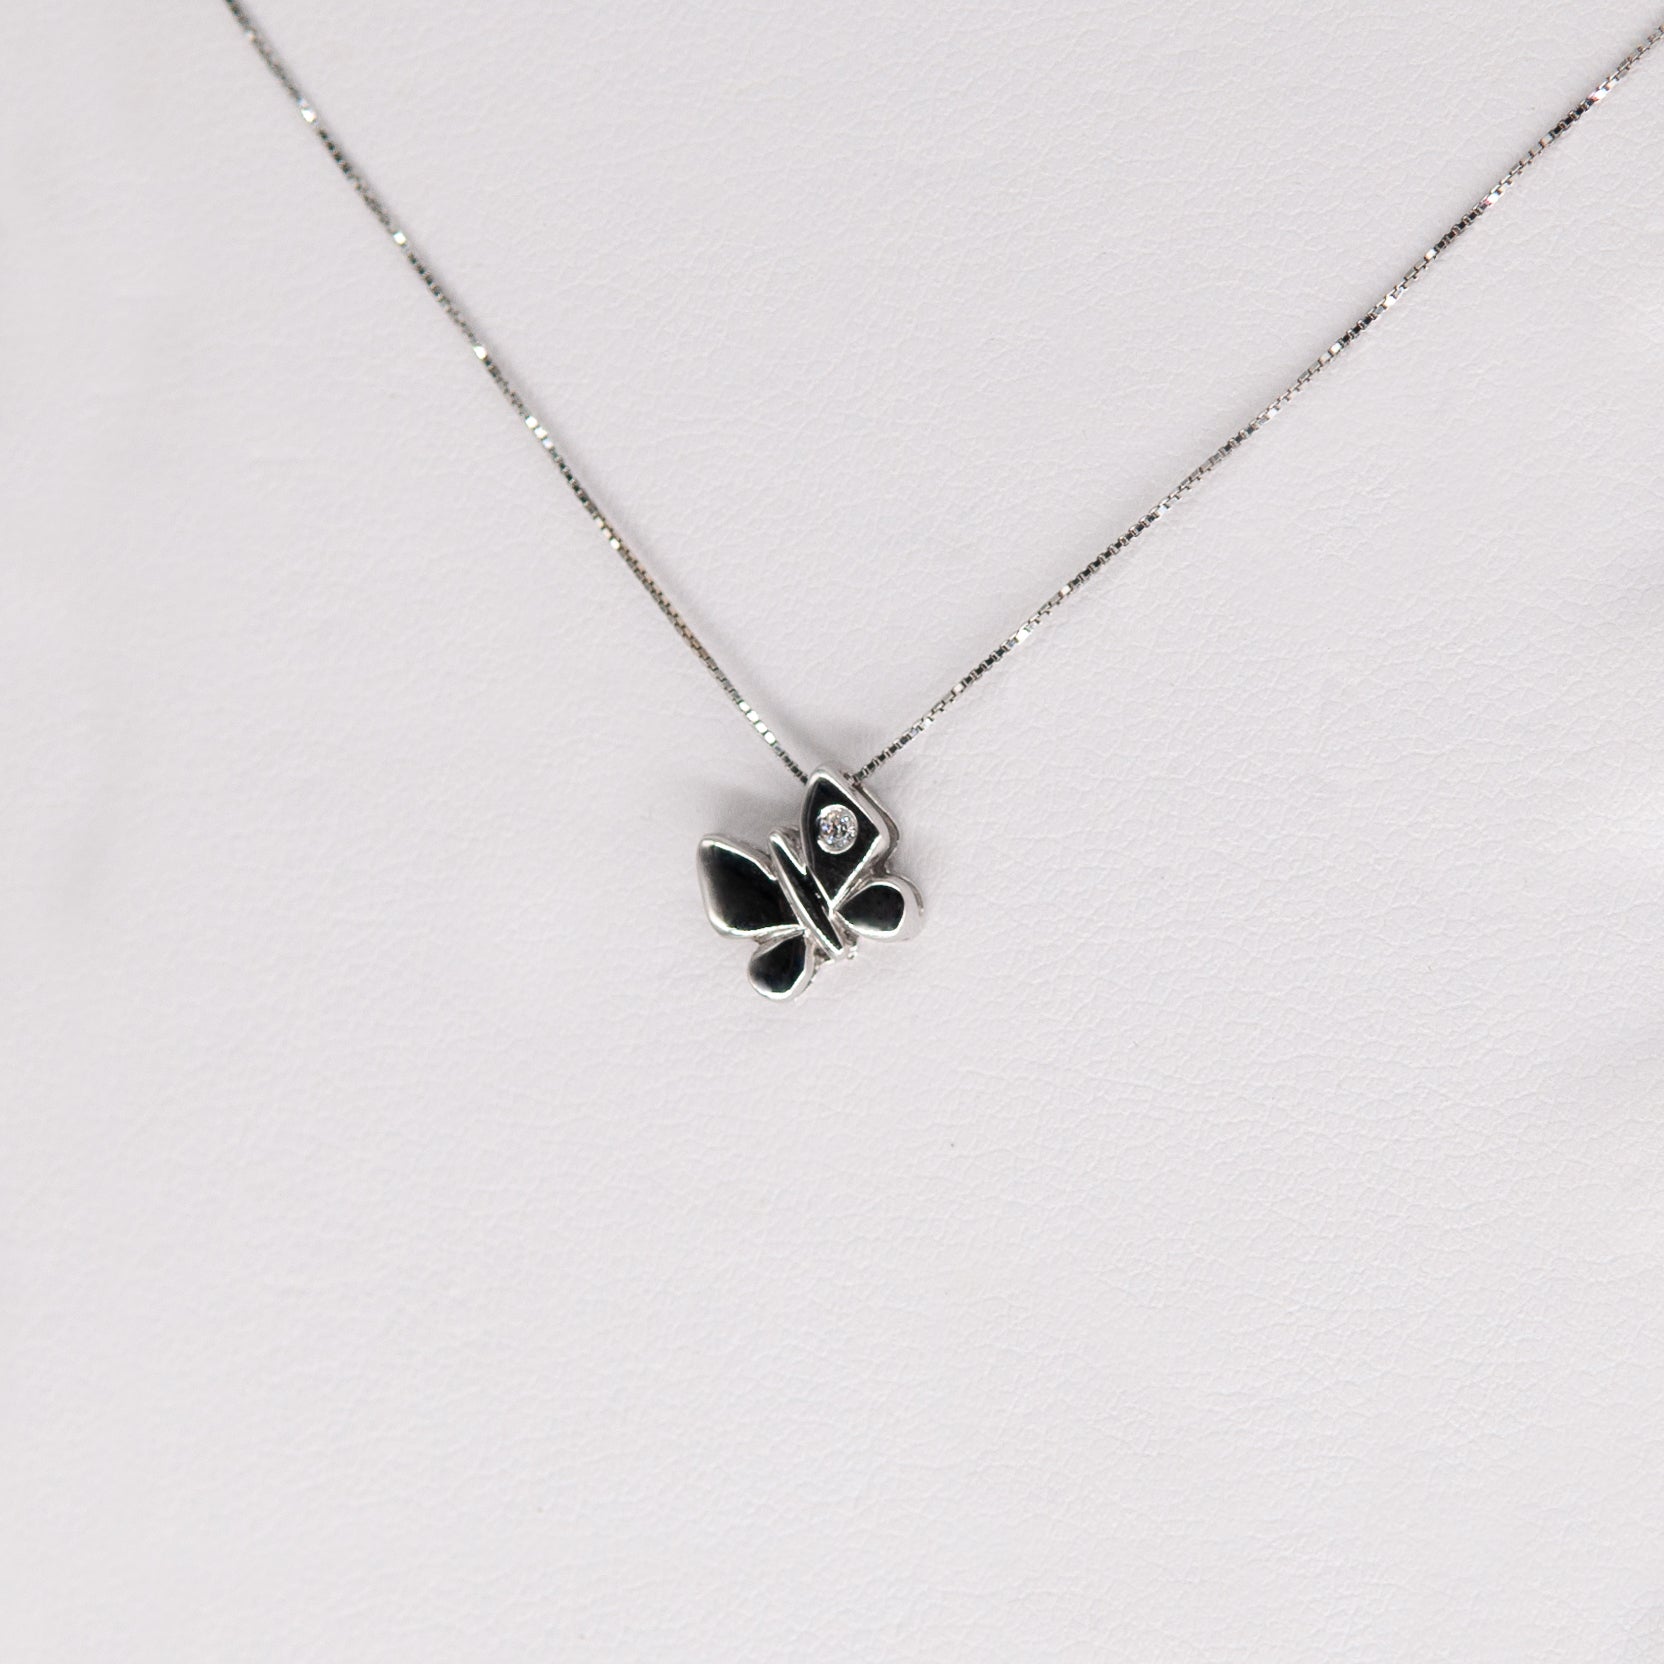 Little butterfly necklace with diamond